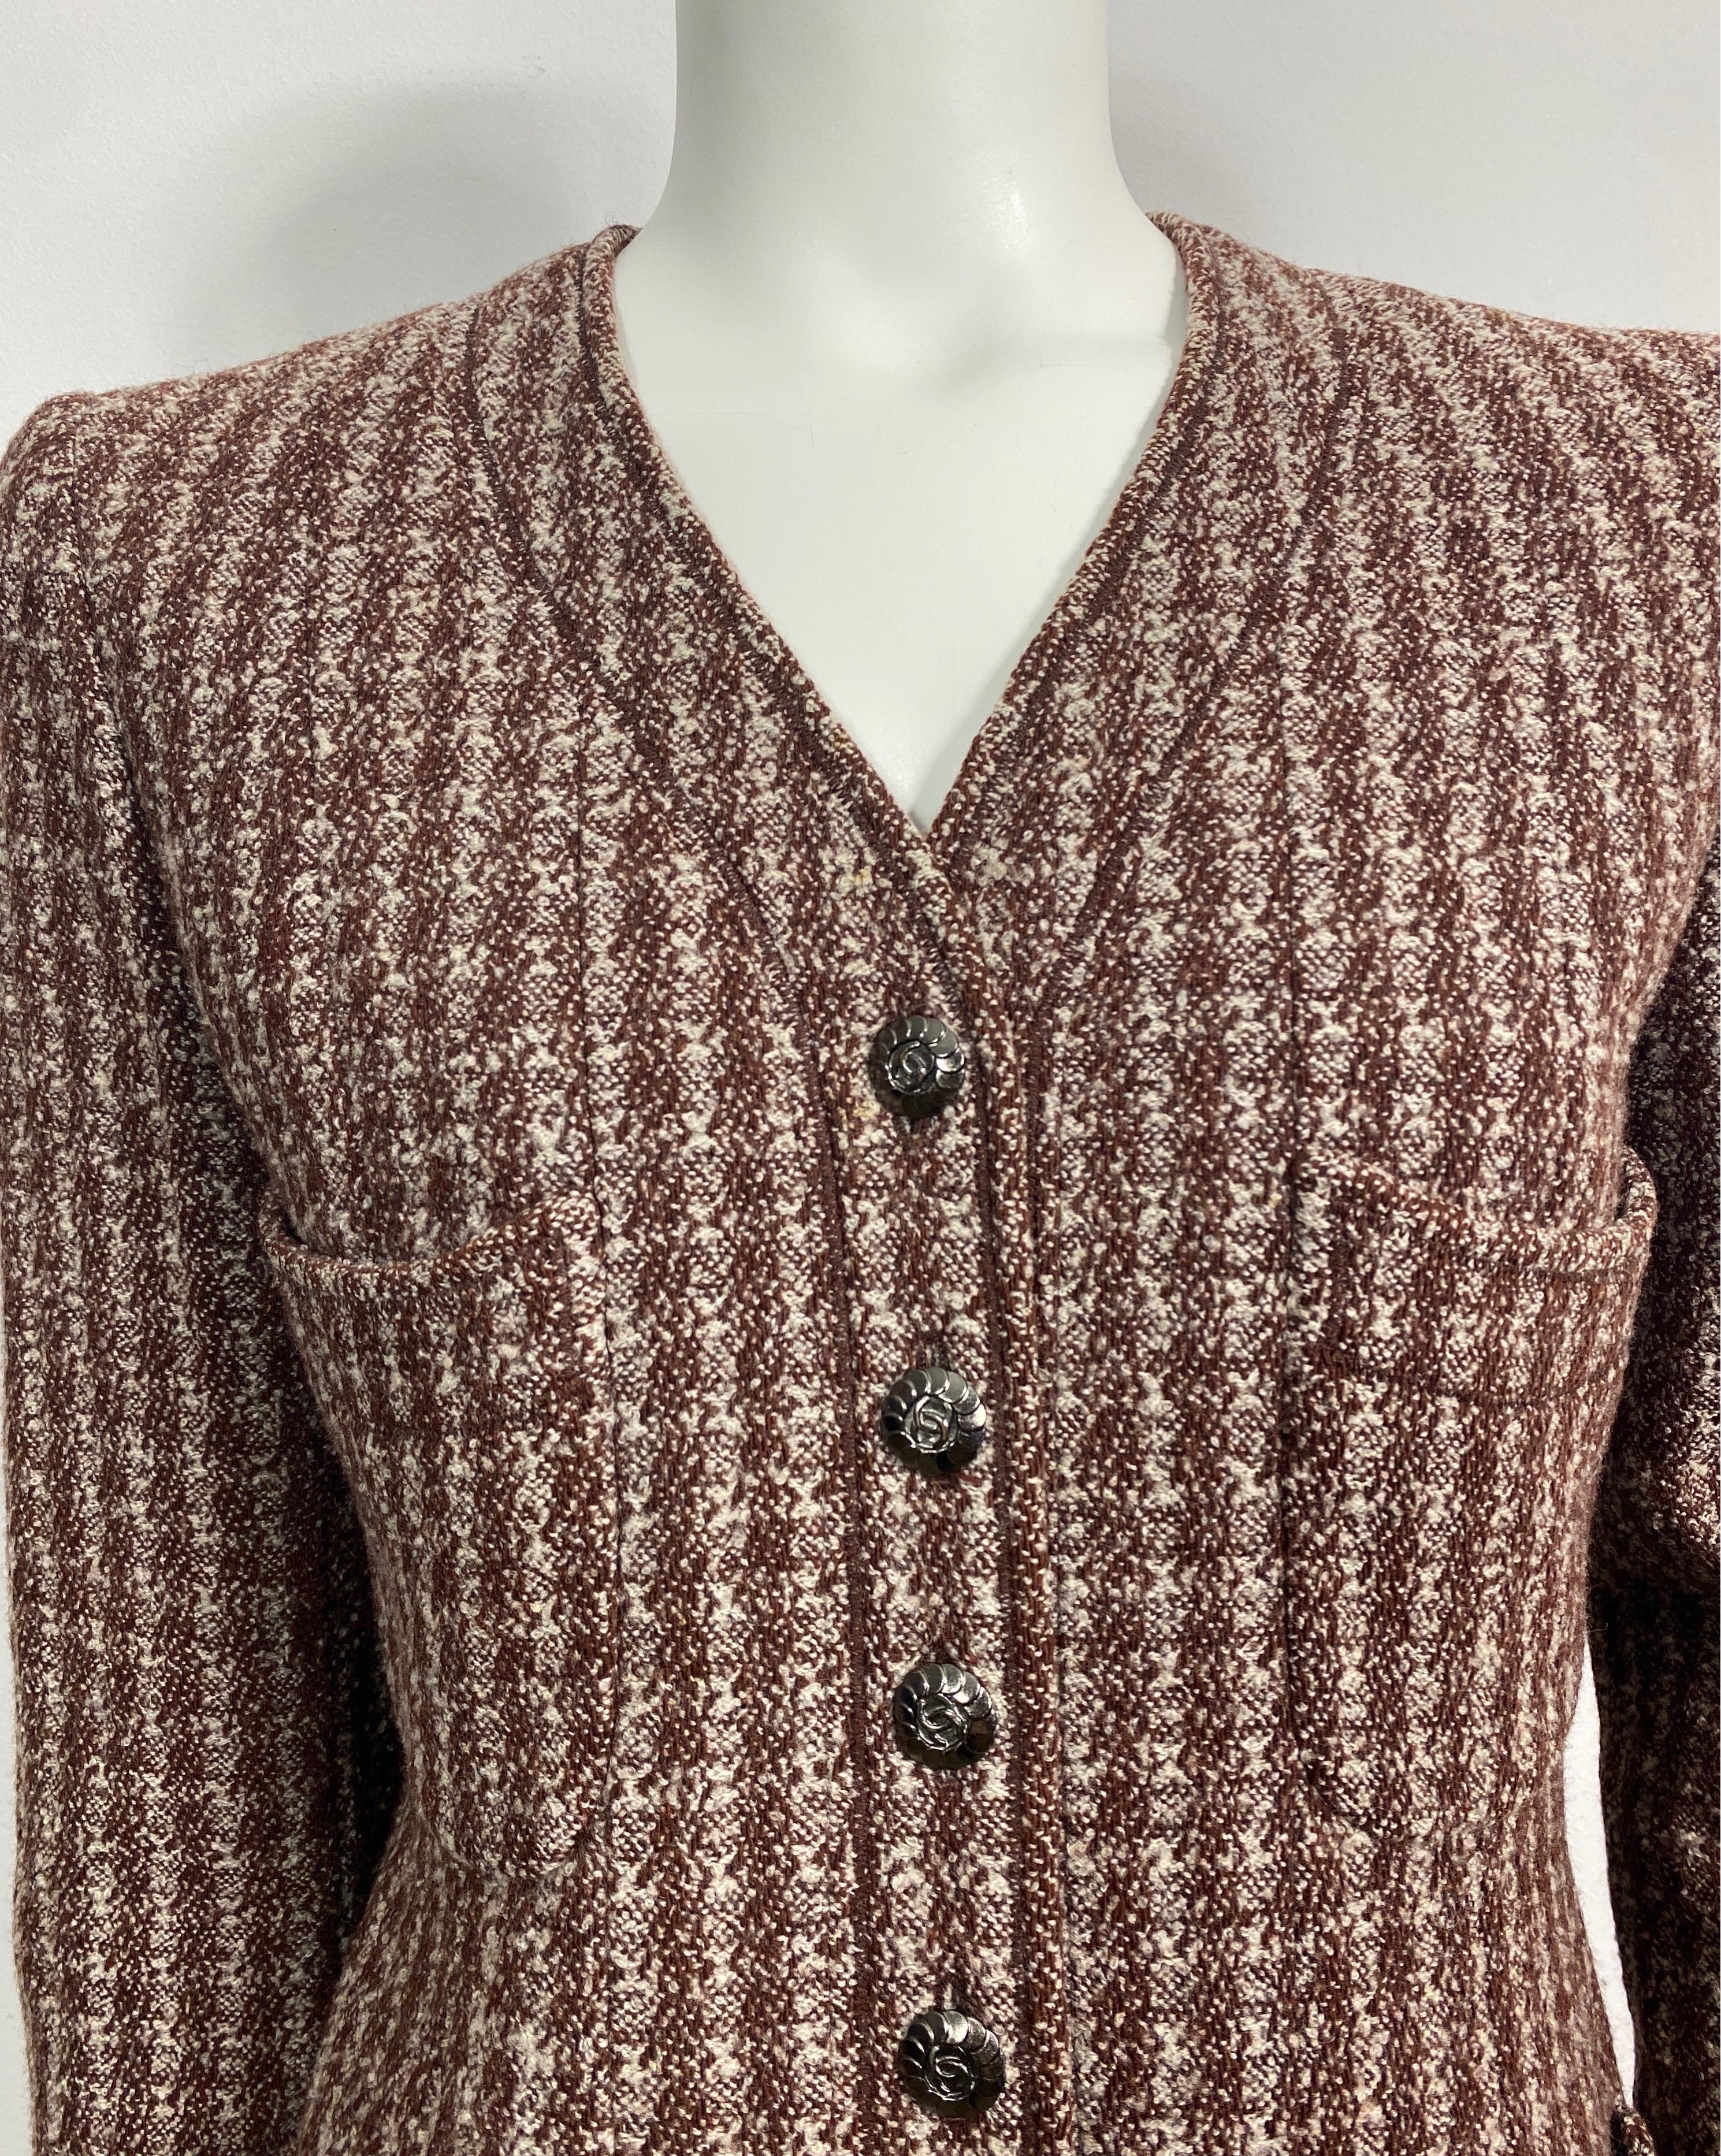 Chanel 1990’s Brown and Crème Wool Nailshead Tweed Skirt Suit-size 36 For Sale 1